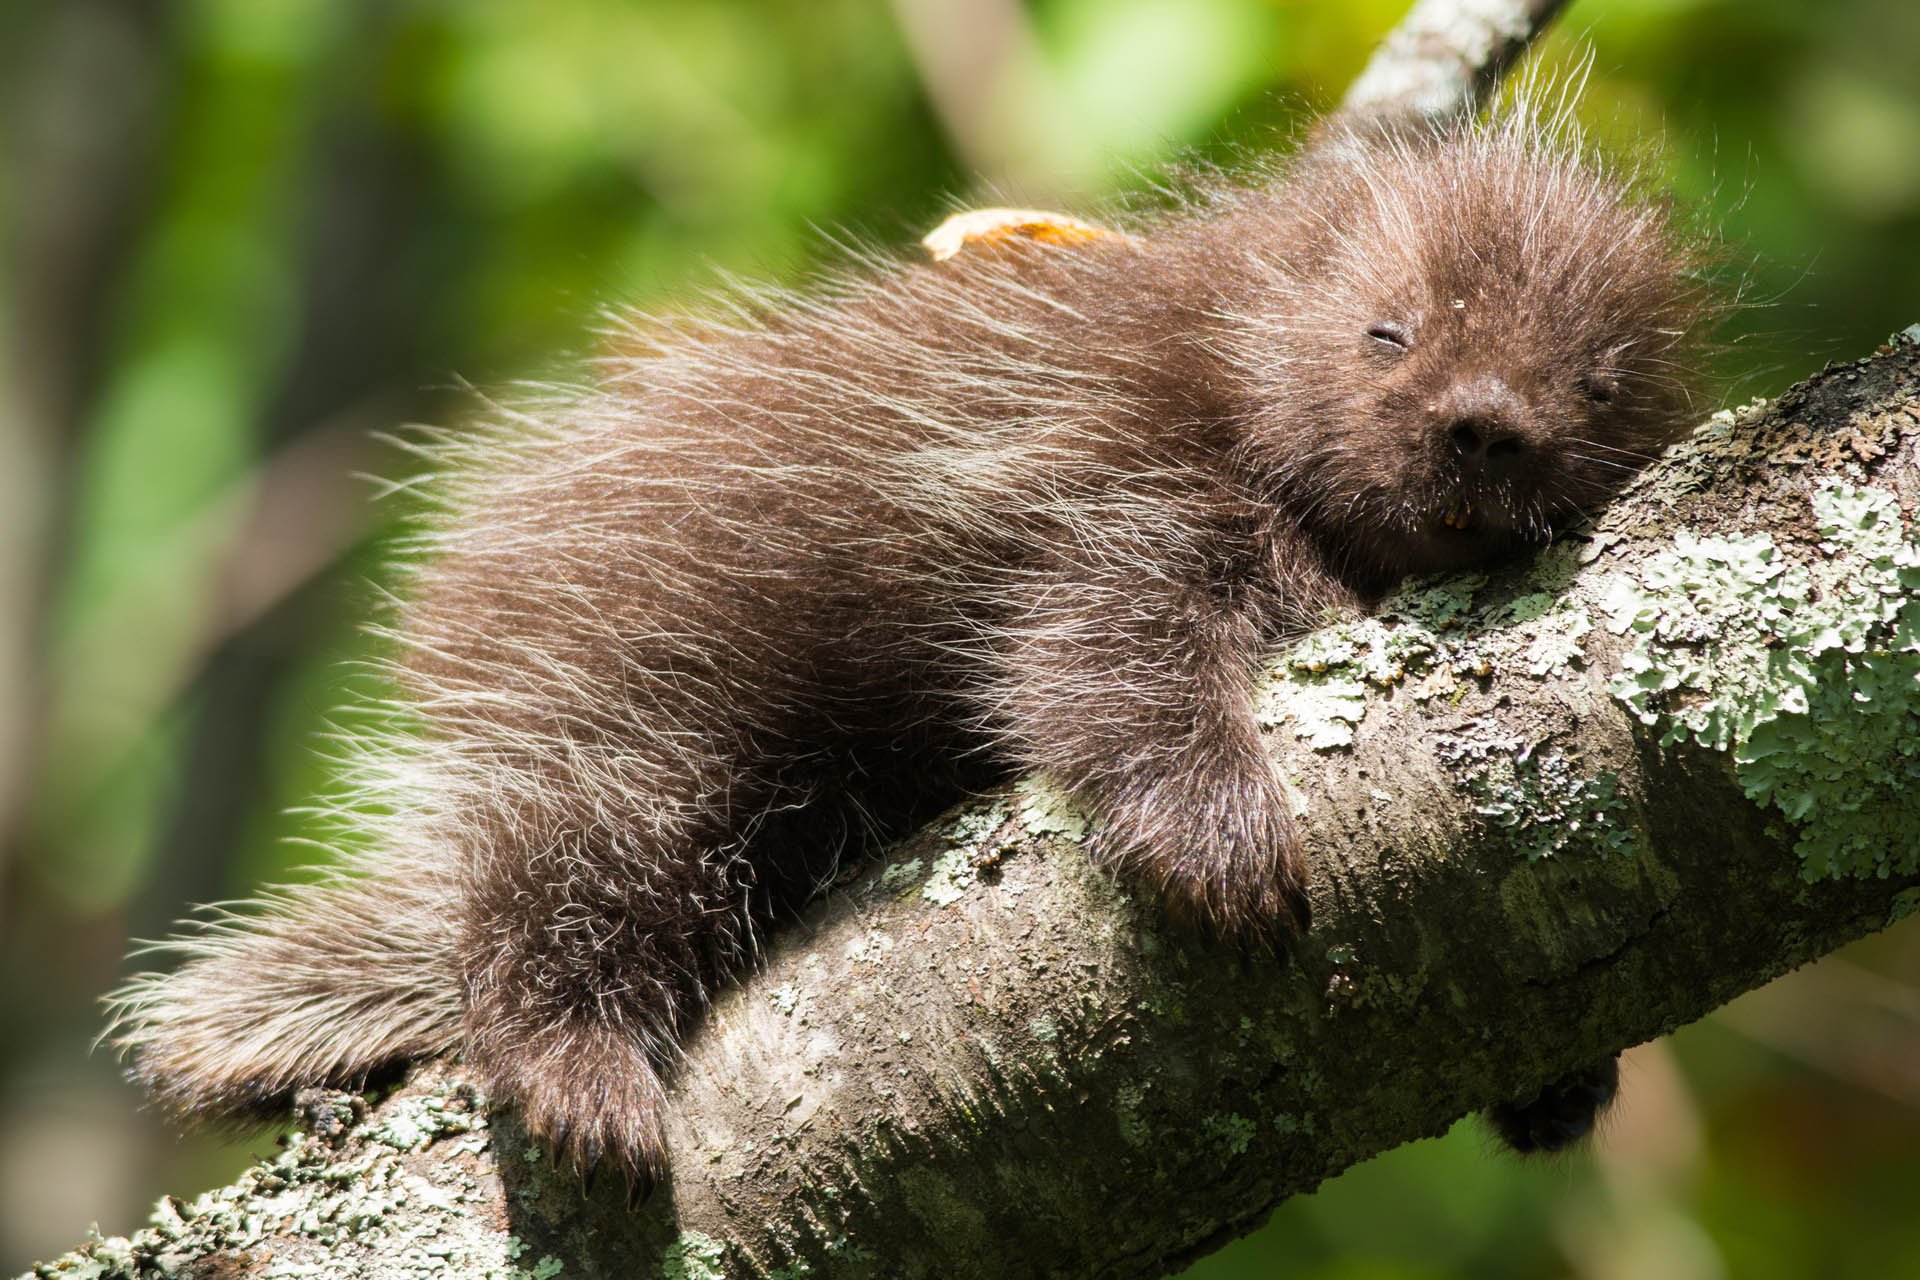 A baby porcupine laying on a branch with limbs dangling.